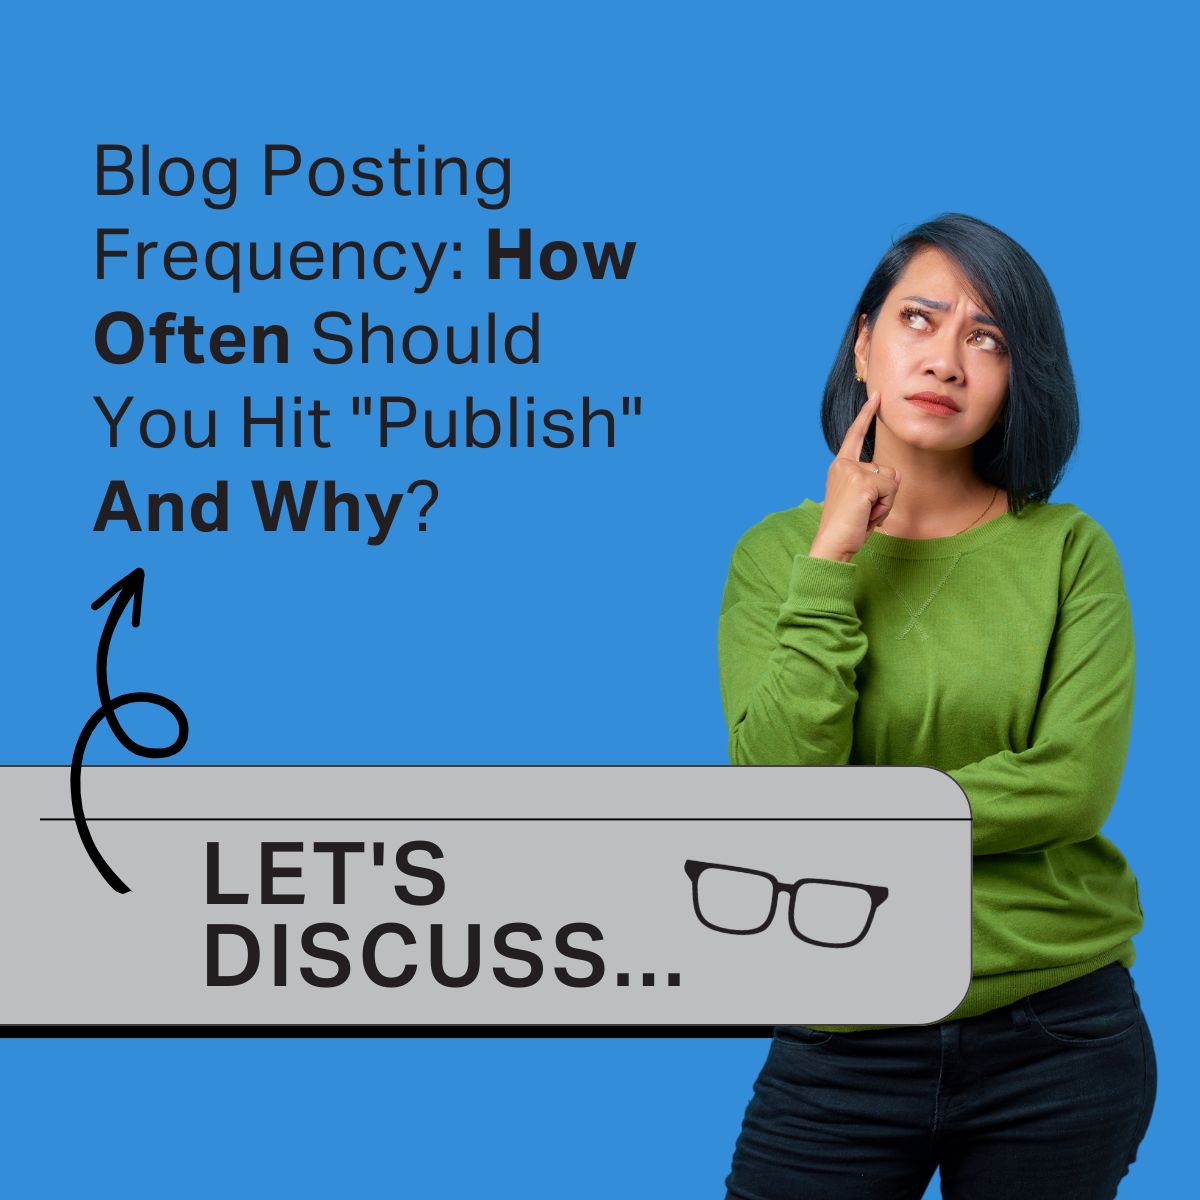 There's no magic number when it comes to #BlogFrequency, but consistency is key! Ultimately, the best frequency depends on:

➡️ Your resources
➡️ Your audience
➡️ Your goals

What's your current blog posting frequency?  Let us know!  

#ContentMarketing #BloggingTips